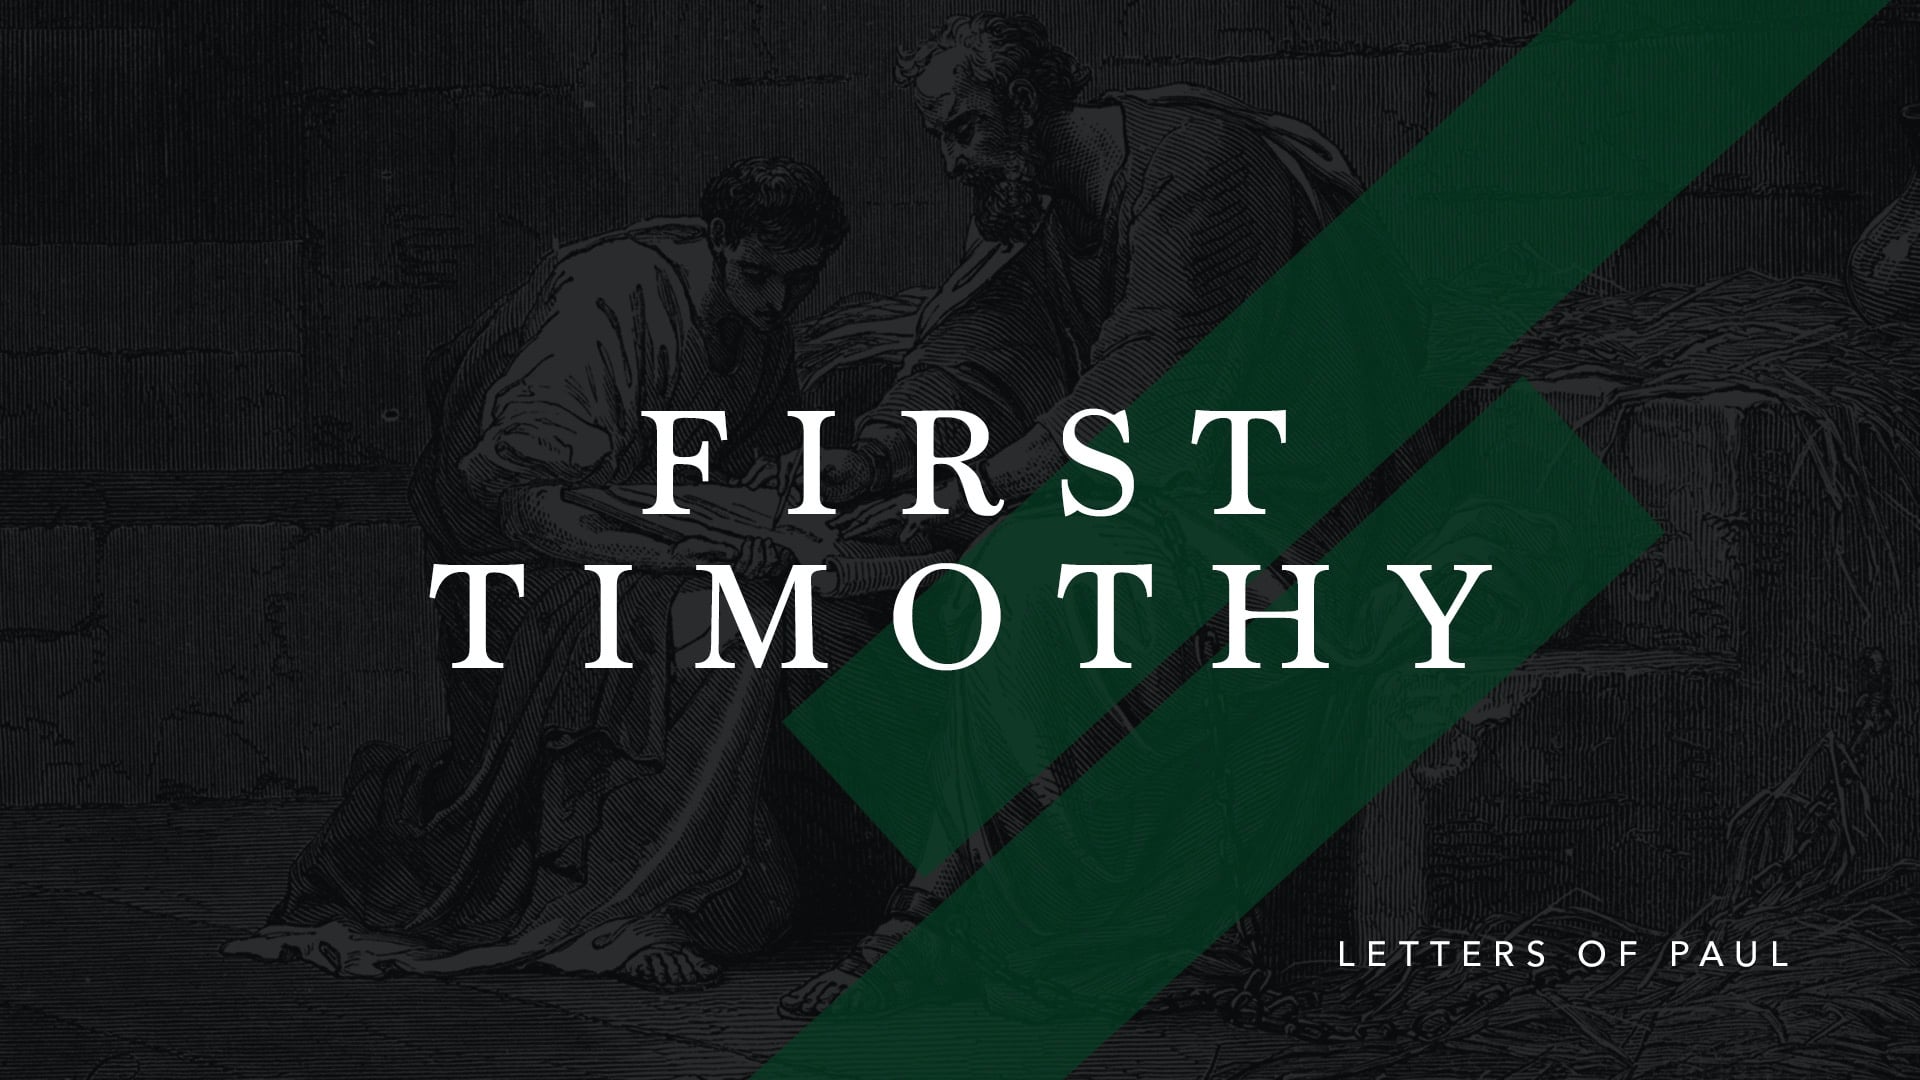 First Timothy: Prayer For Those In Authority